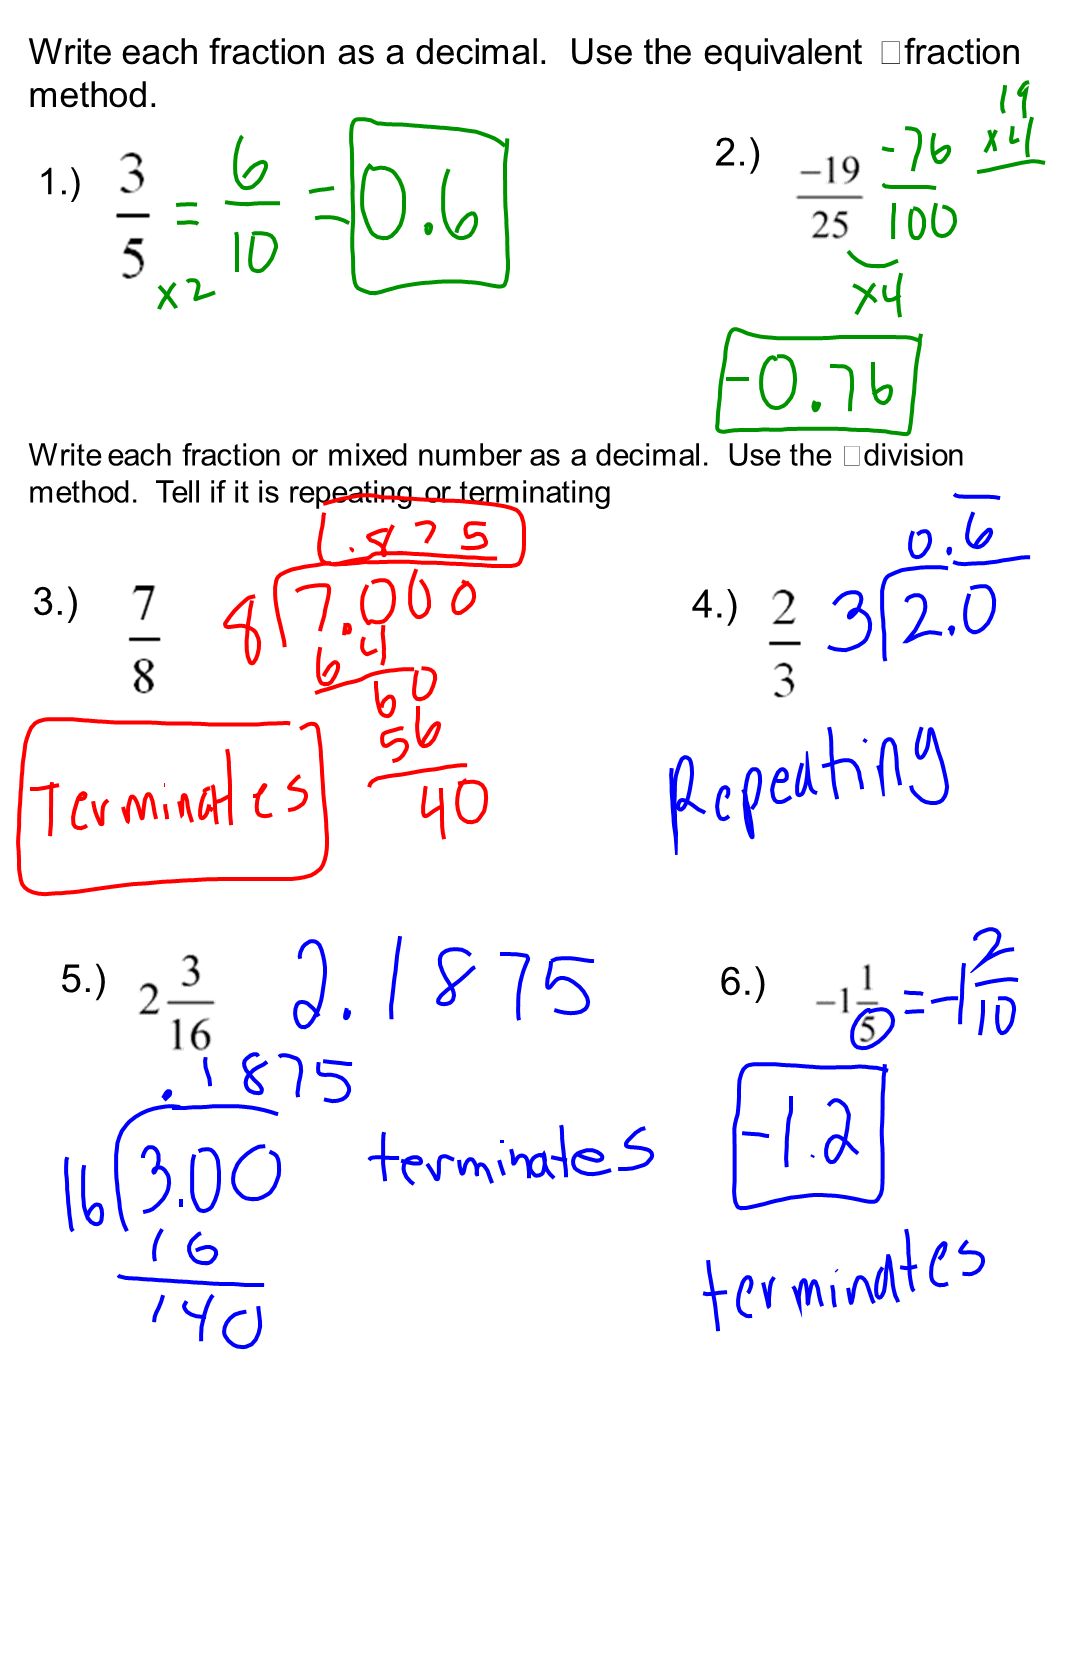 What is #4/5# as an equivalent fraction?